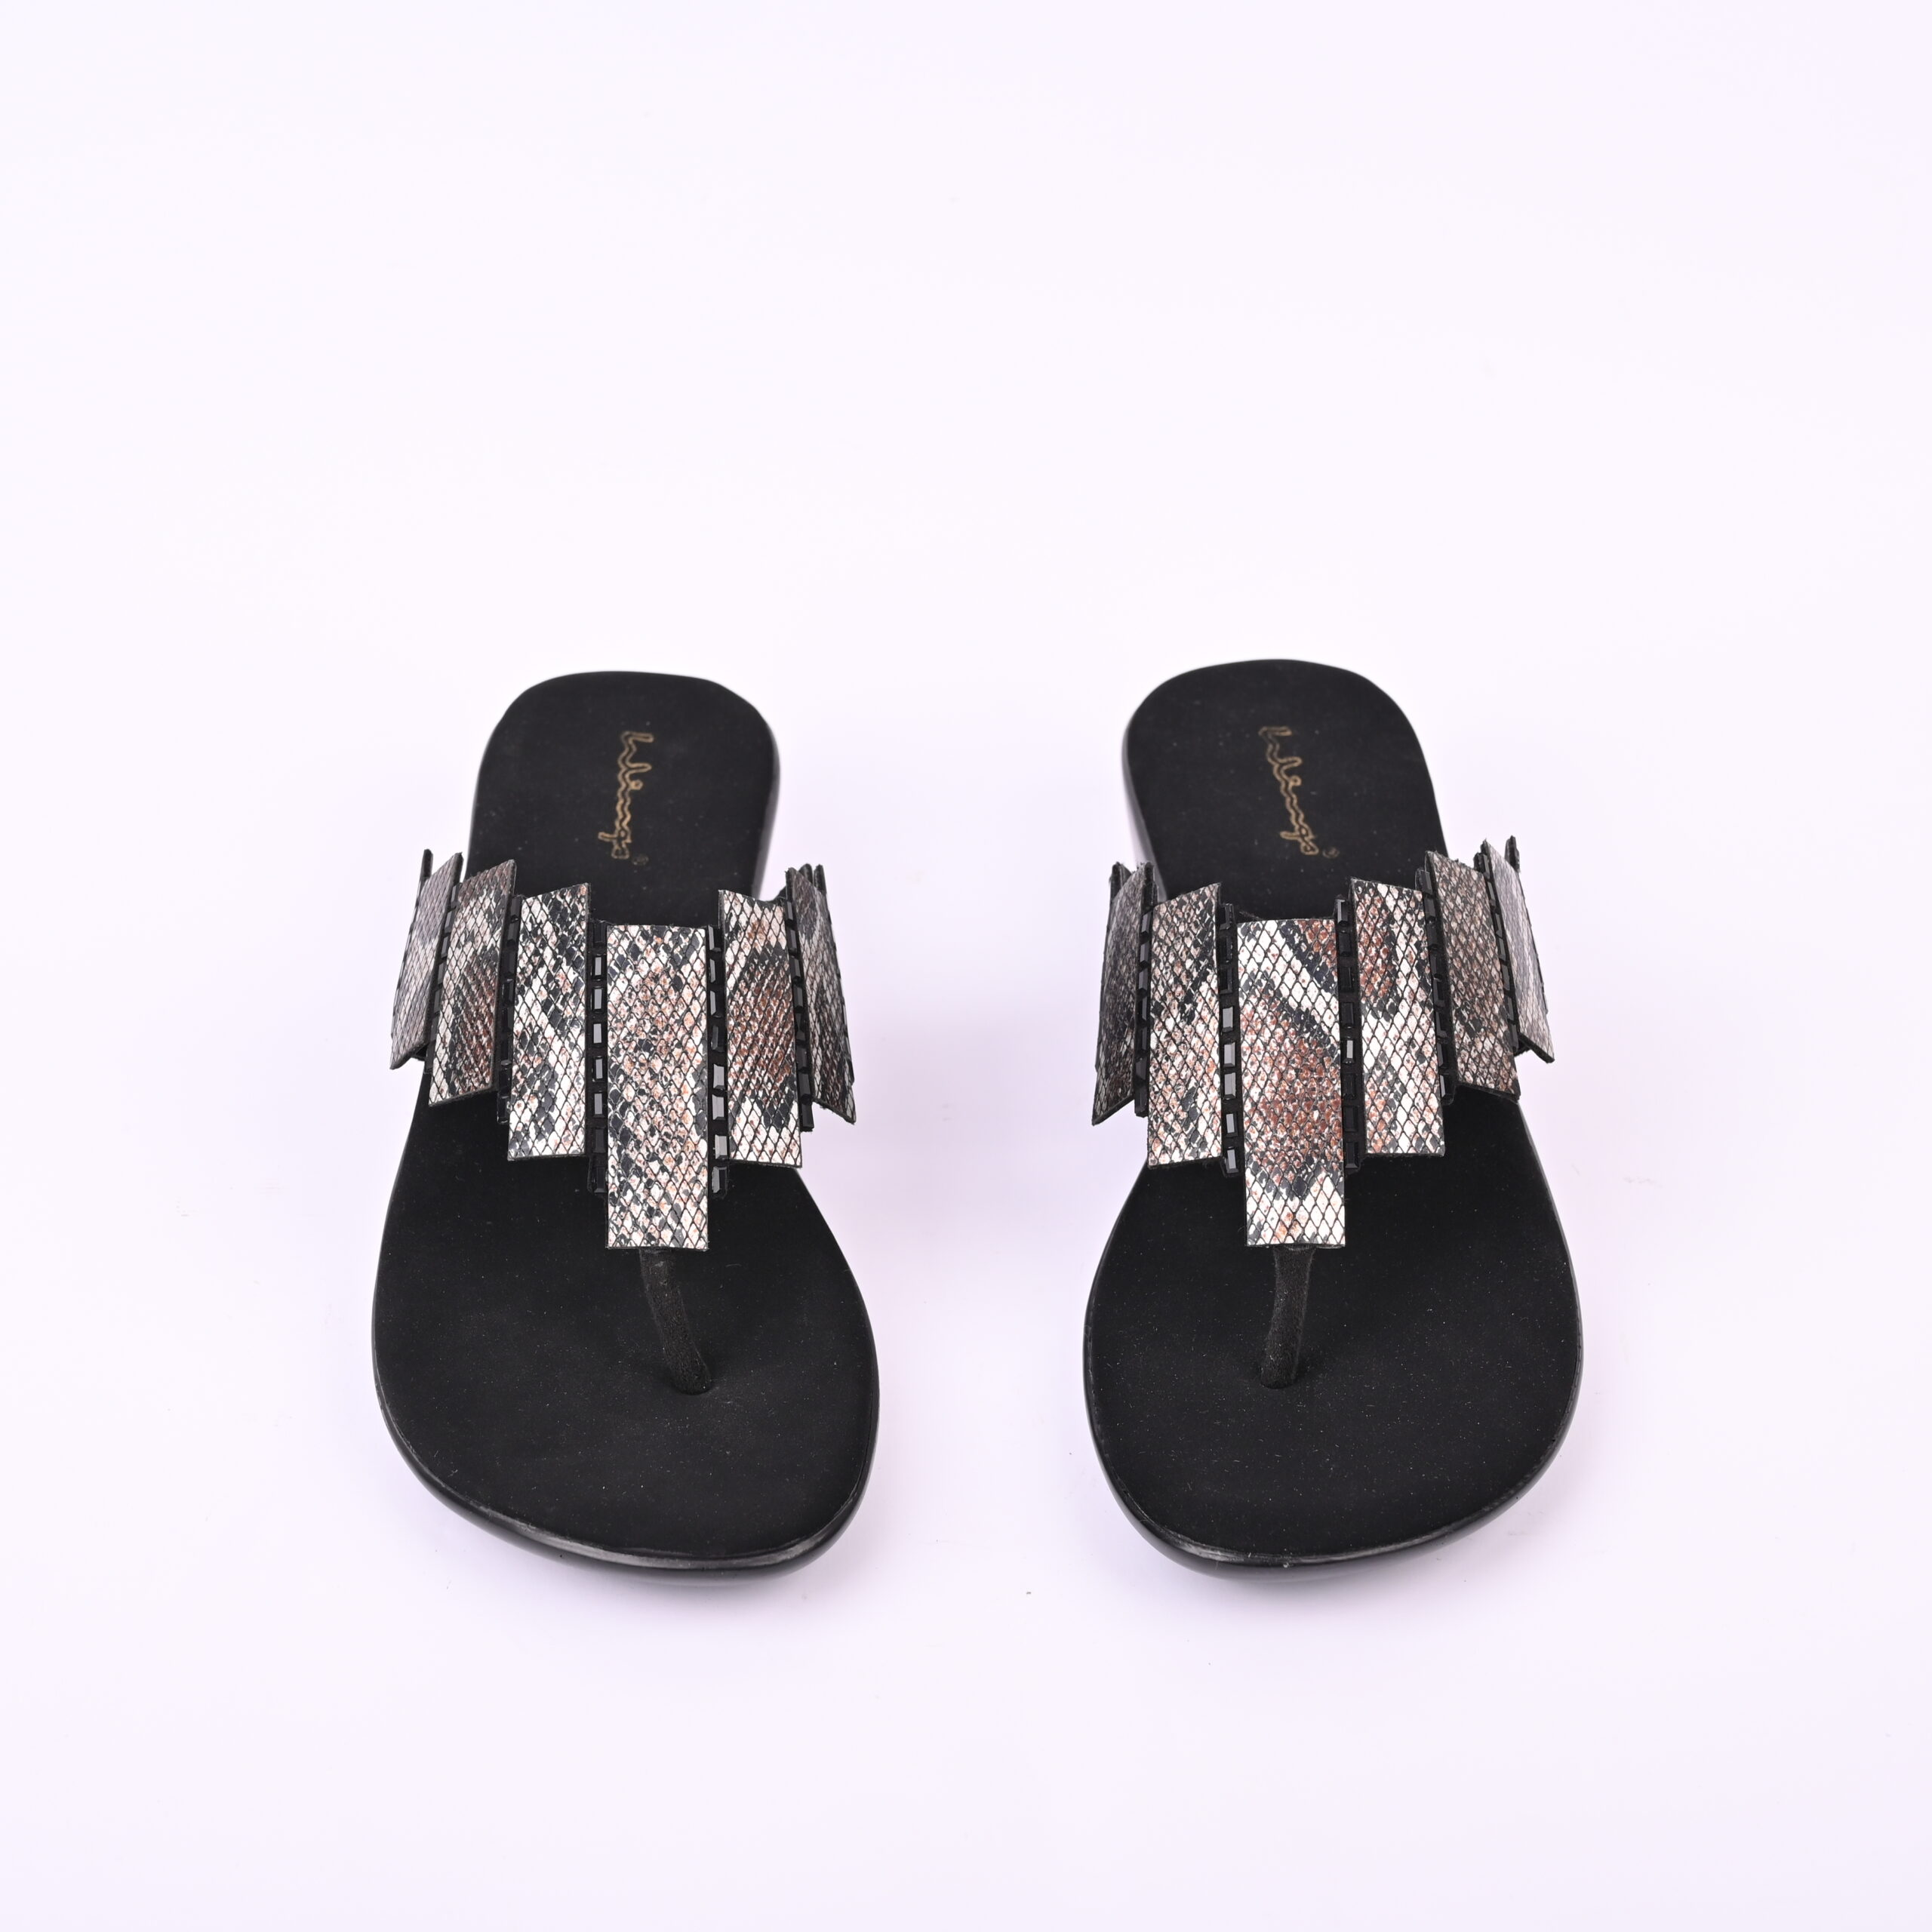 GUCCI Marmont logo-embellished leather sandals | Embellished leather sandals,  Gucci slippers women, Heel sandals outfit